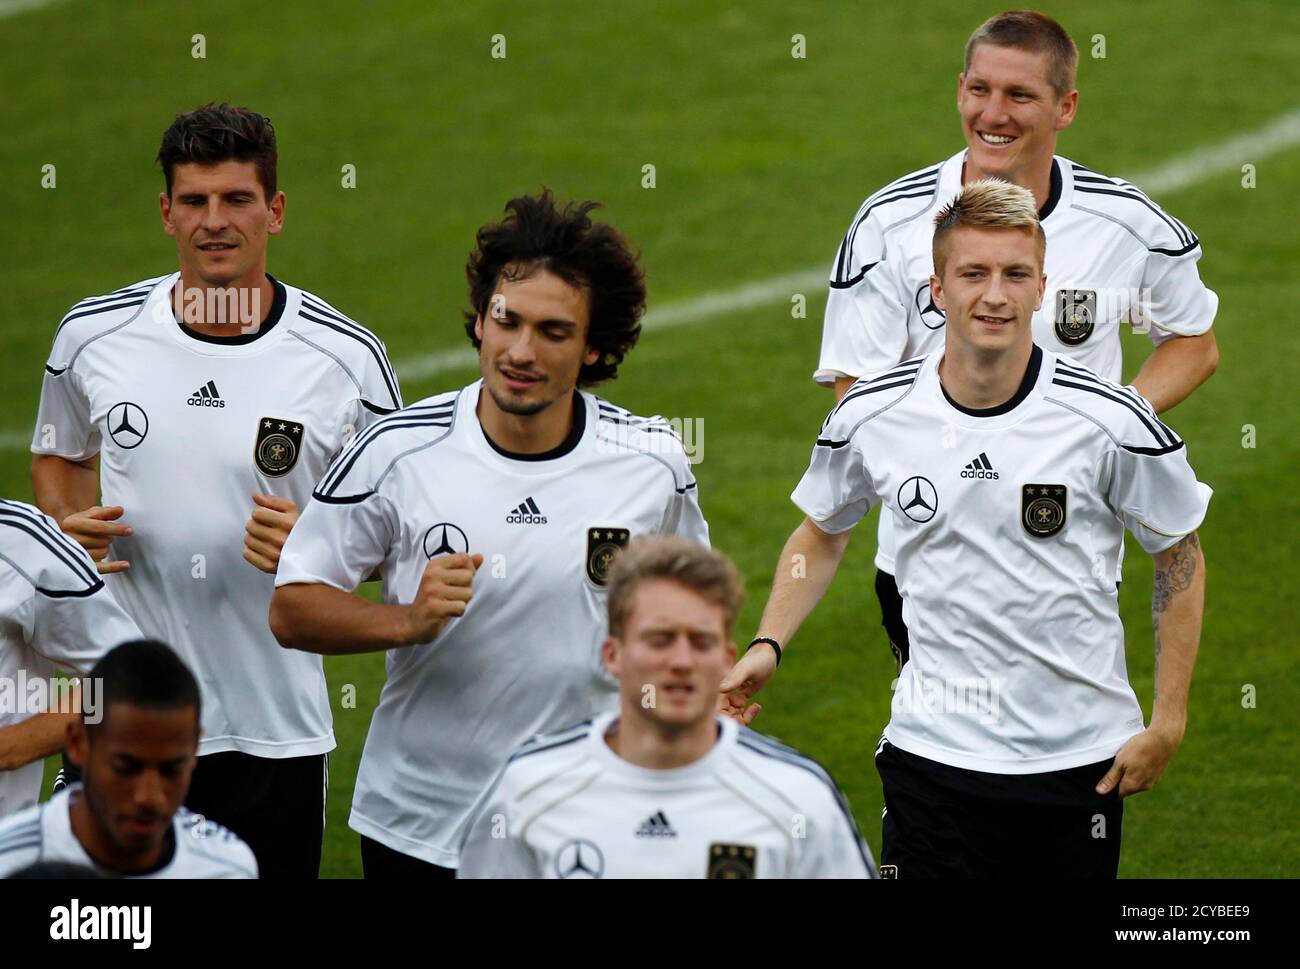 R-L) Bastian Schweinsteiger, Marco Reus, Mats Hummels and Mario Gomez warm up during a national soccer team training session in Mainz, 4, 2011. will face Turkey in a Euro 2012